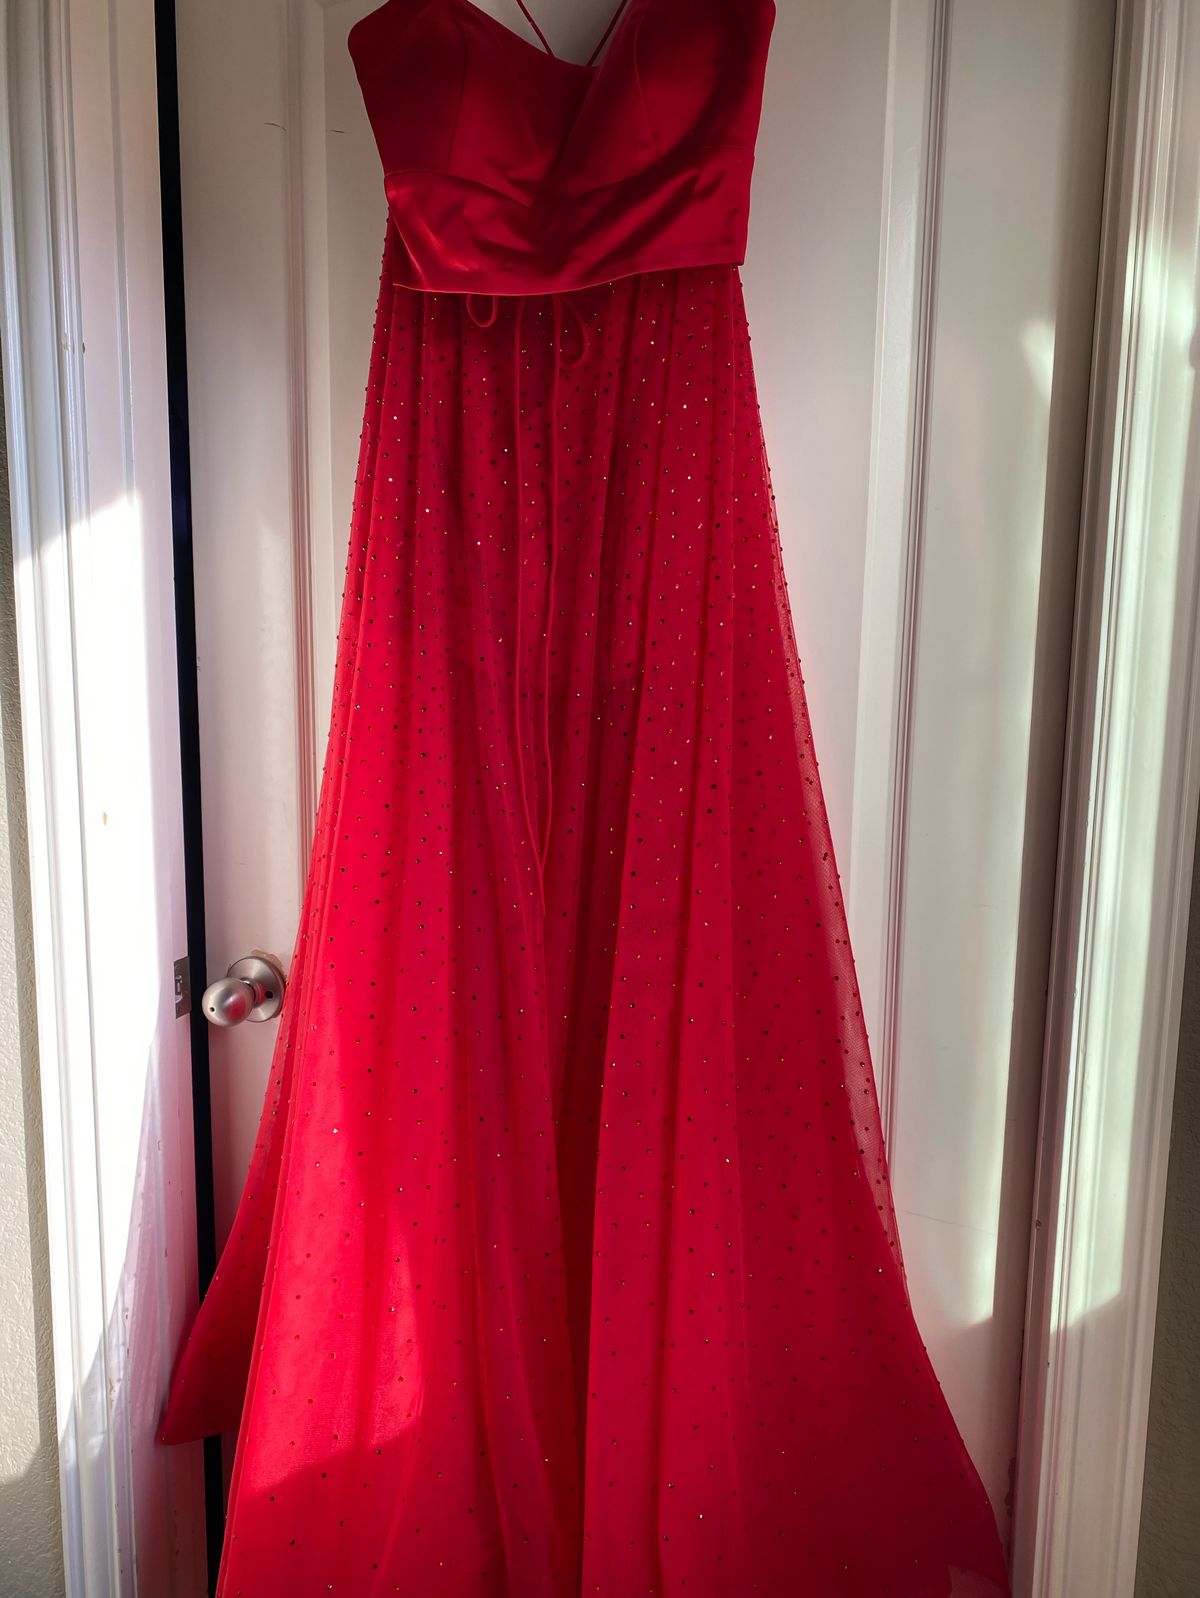 Sherri Hill Size 10 Prom Red Floor Length Maxi on Queenly